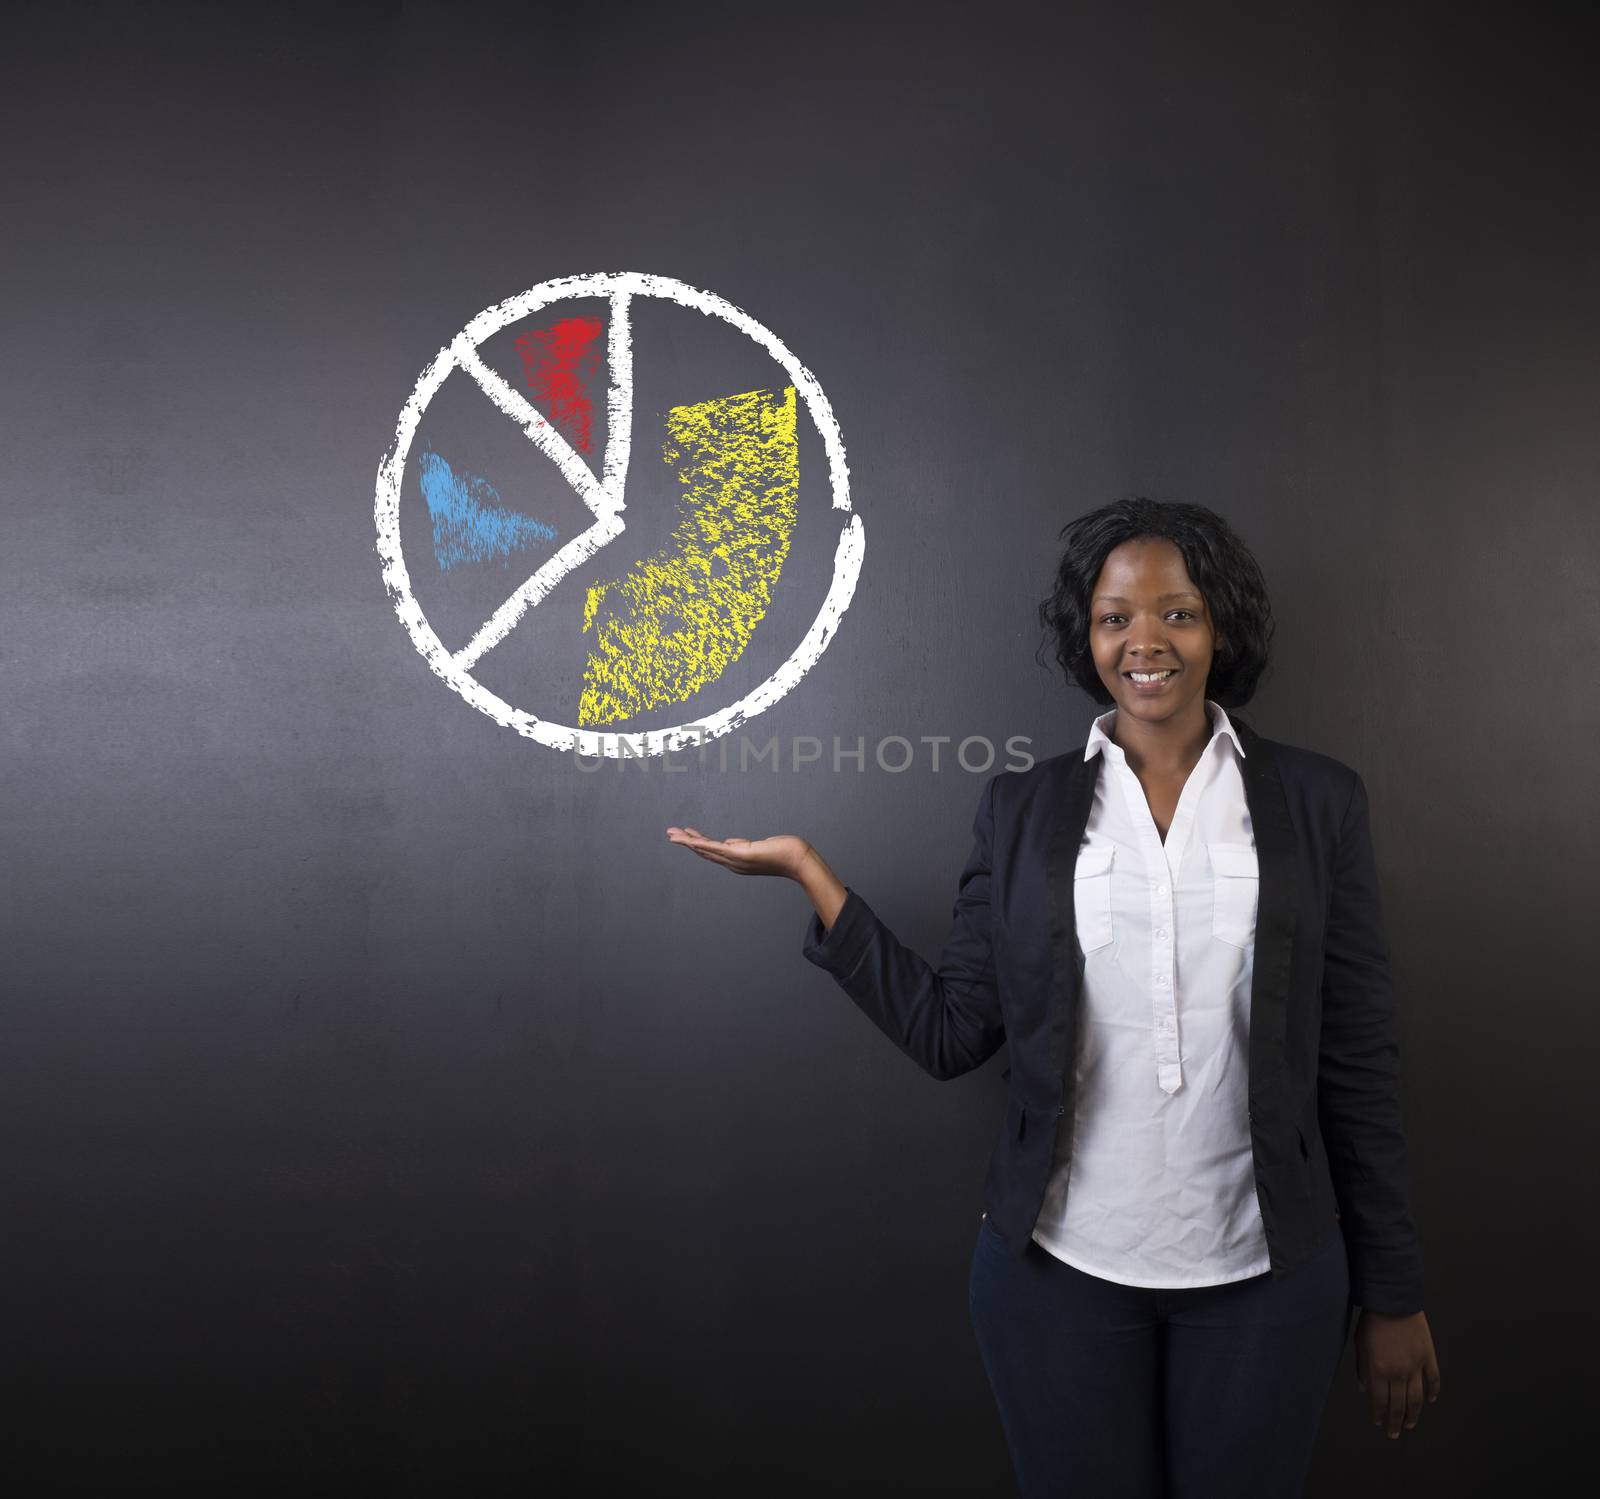 South African or African American woman teacher or student thumbs up against blackboard chalk pie graph or chart by alistaircotton